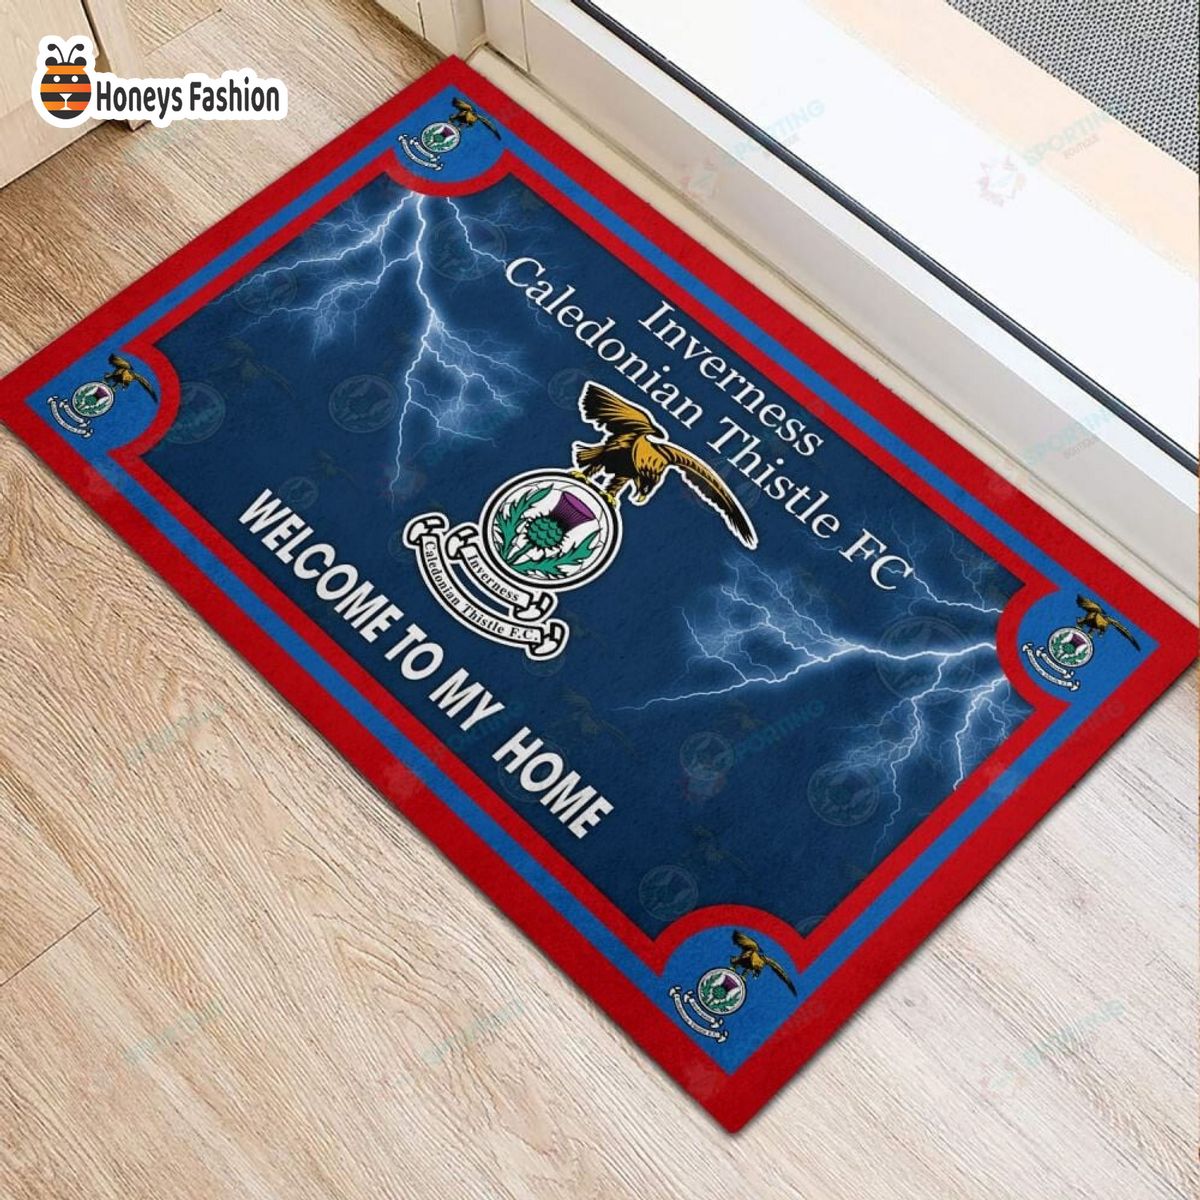 Inverness Caledonian Thistle F.C. welcome to my home doormat